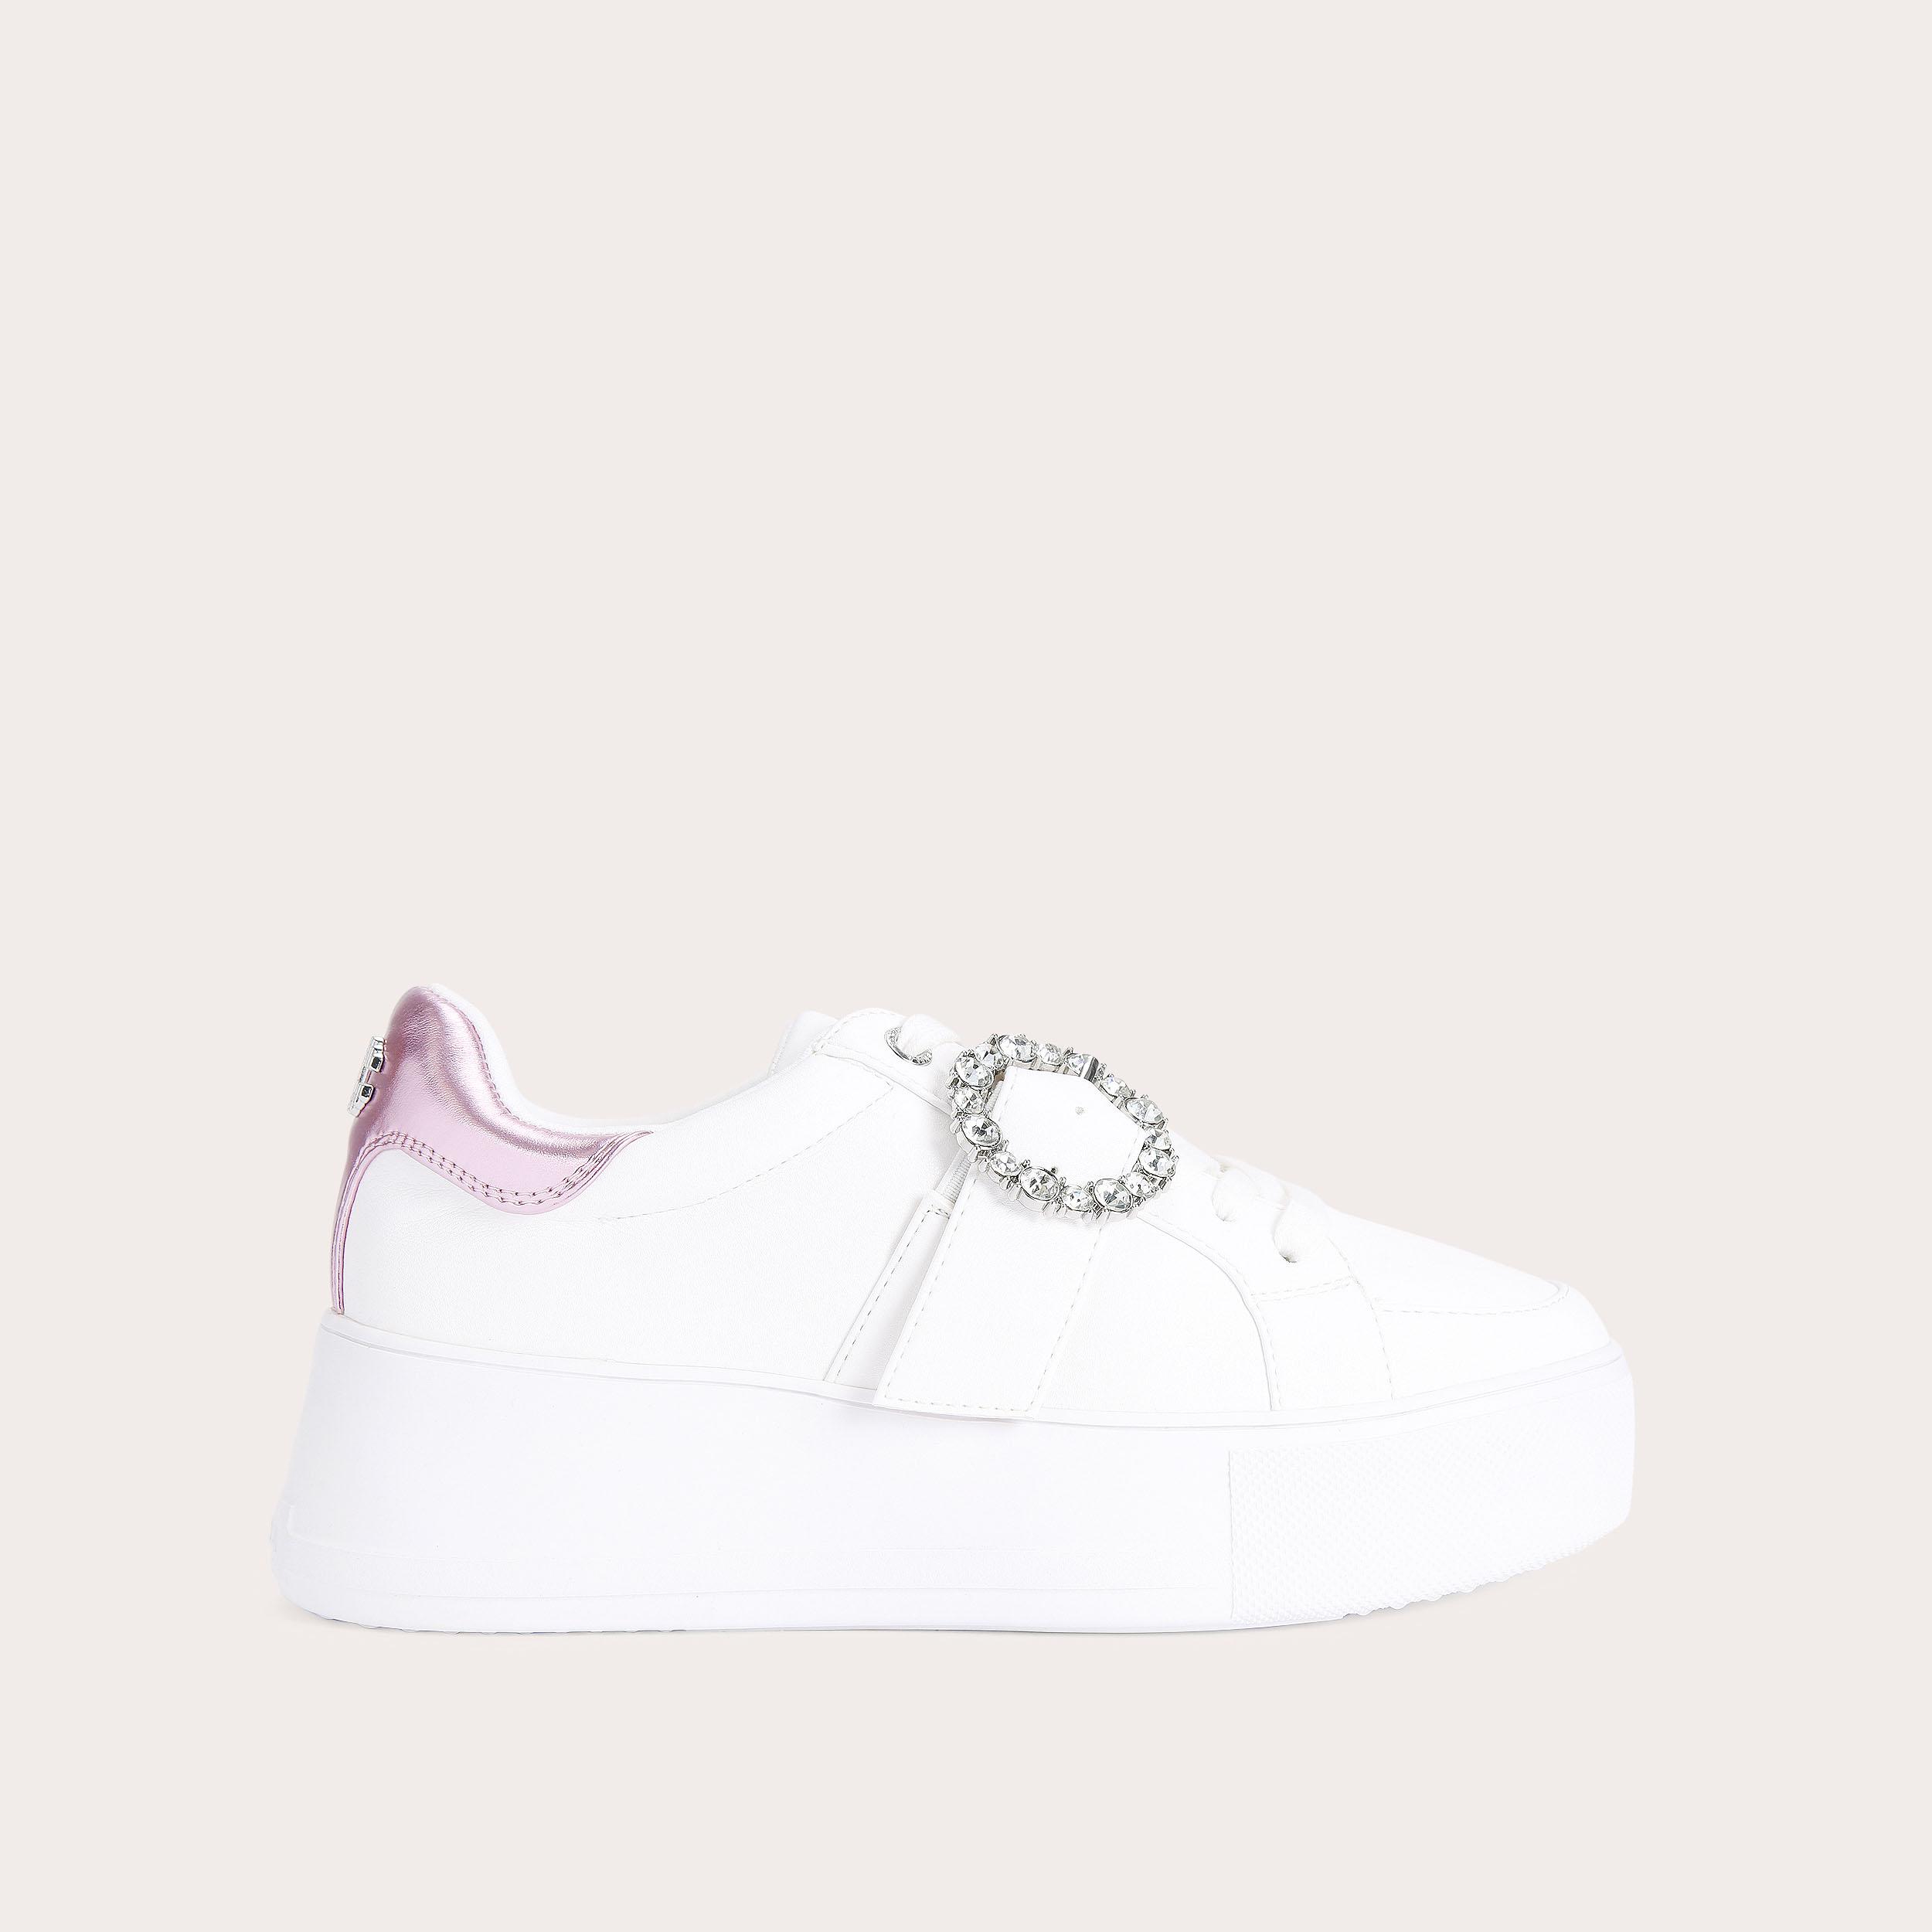 HARMONY SNEAKER White Trainers by CARVELA